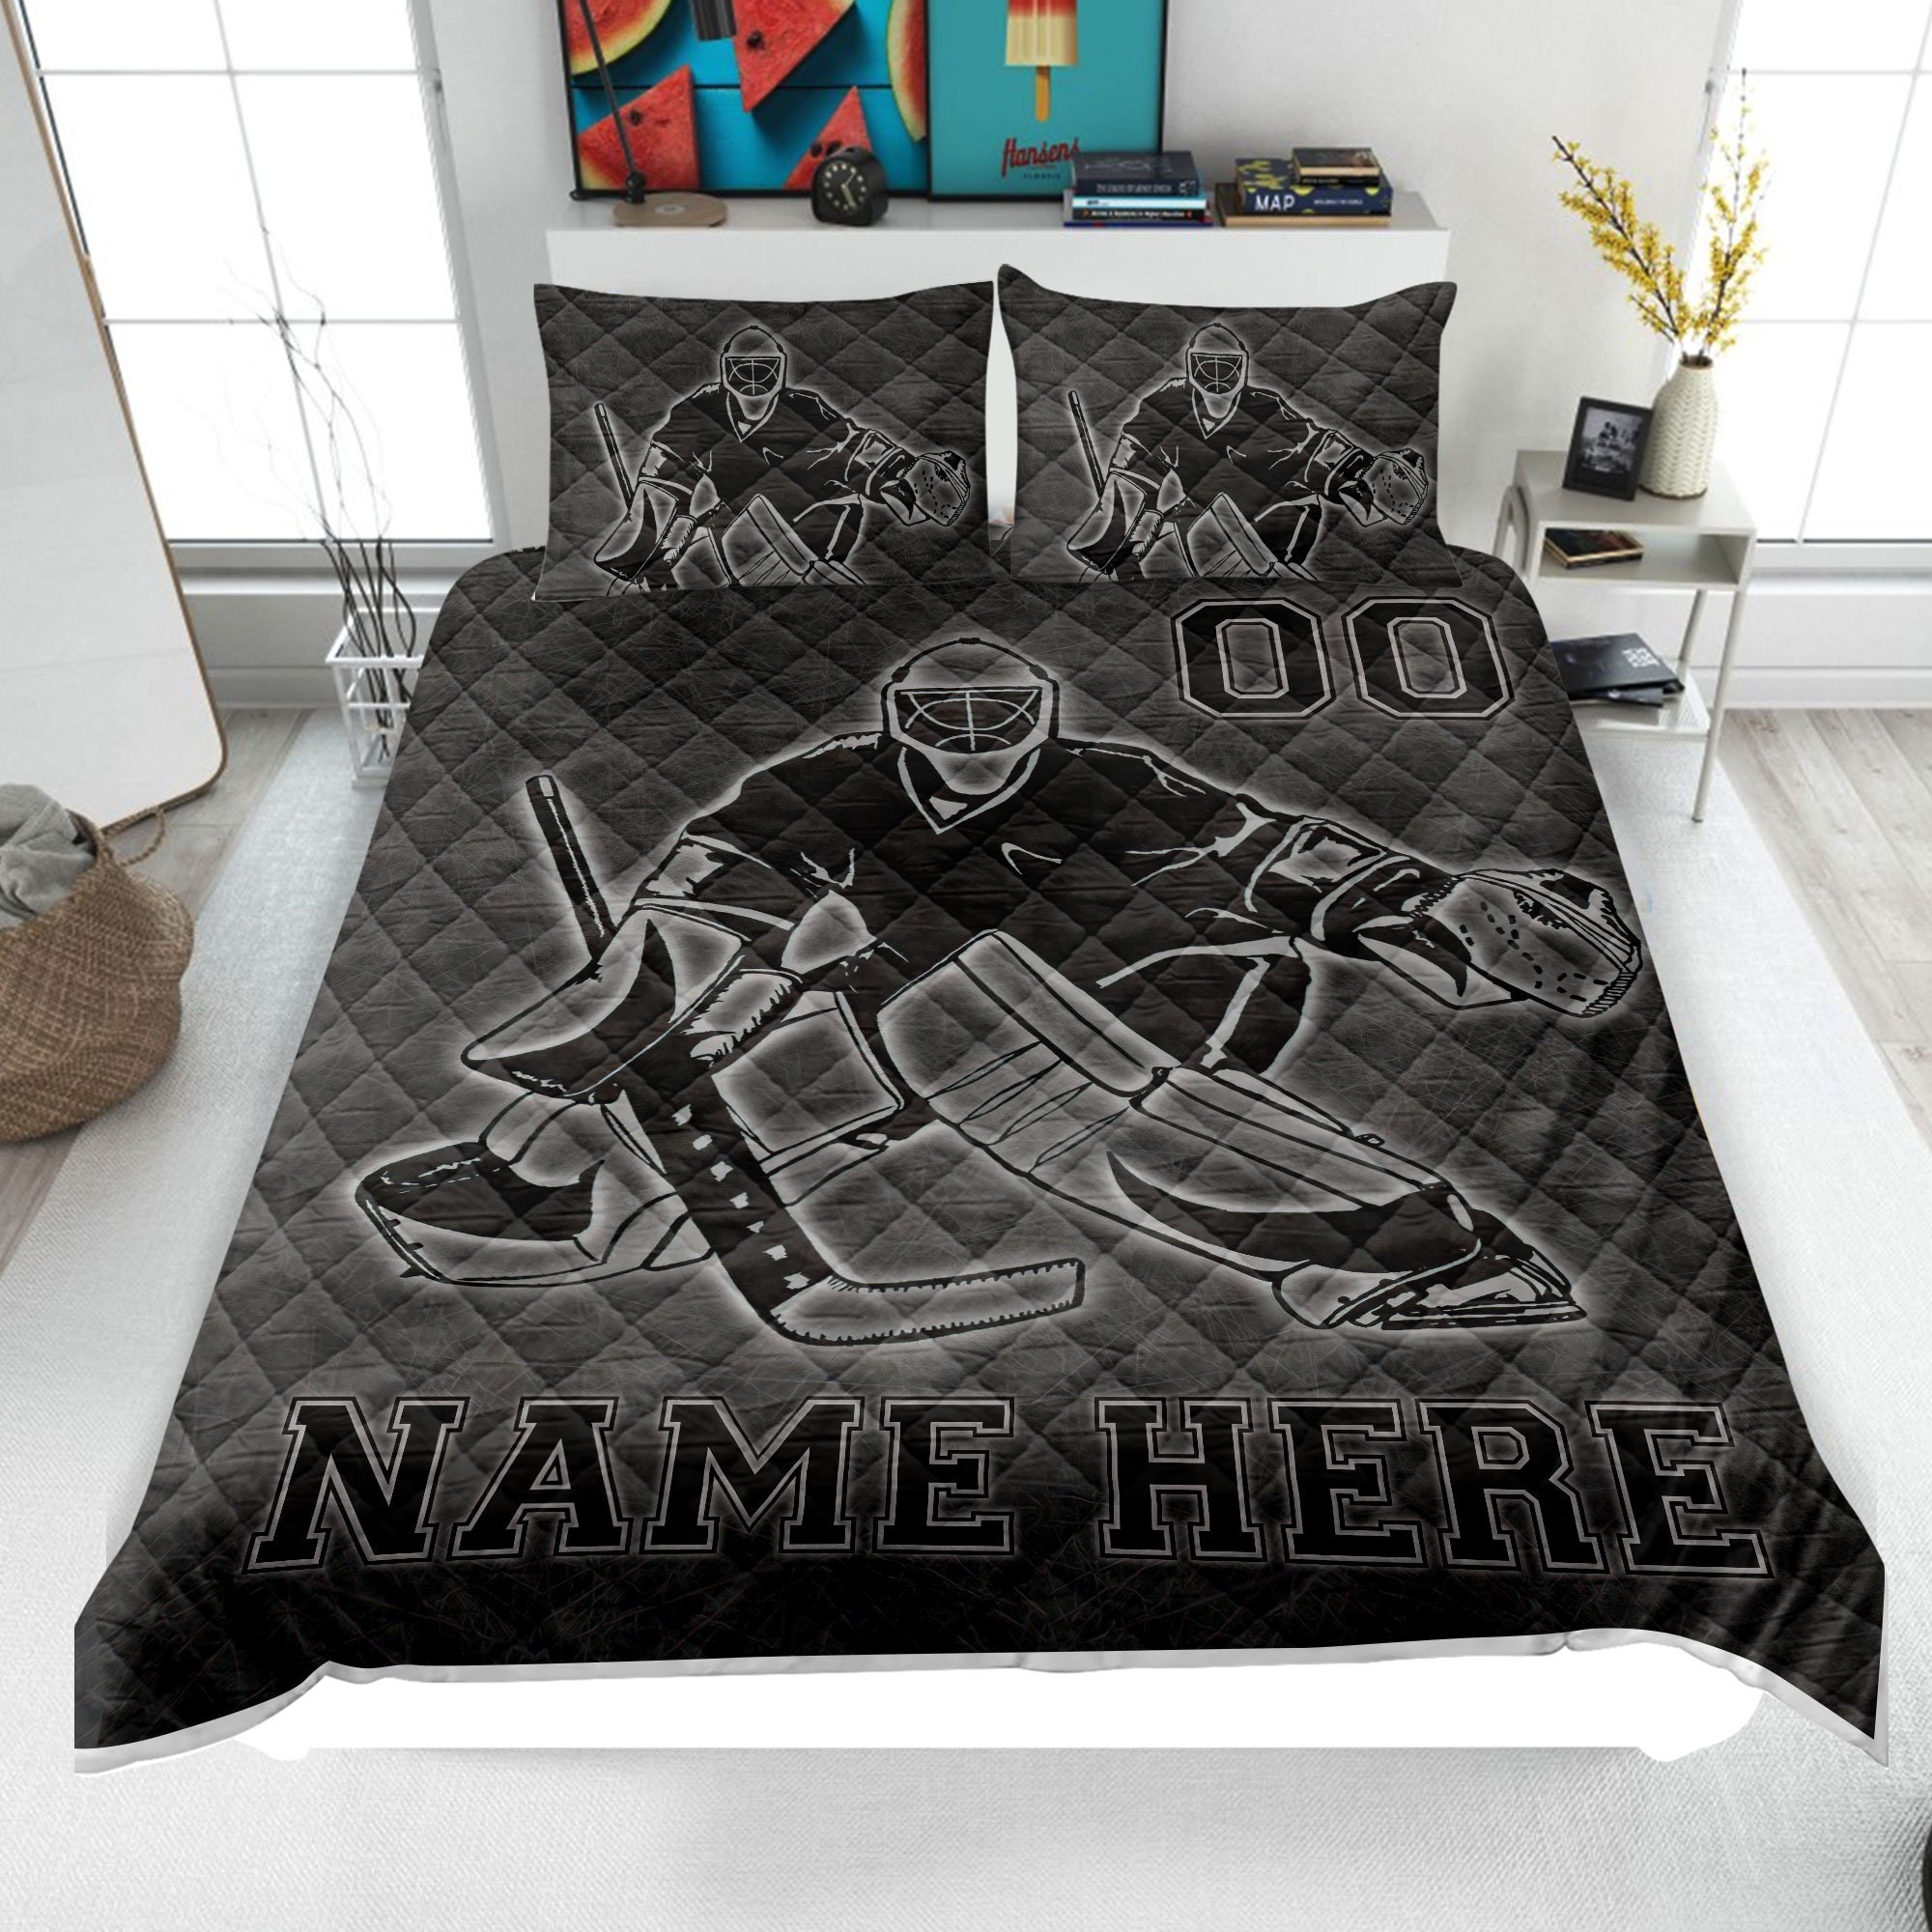 Ice Hockey Bedding Bed Skirts for Kids Boys Girls Room Sports Event Pattern  Bed Skirt Hockey Player Dust Ruffle Pleated Bedskirt Fitted Sheet Decor  Winter Sports Hockey Bedroom Collection Full Size 